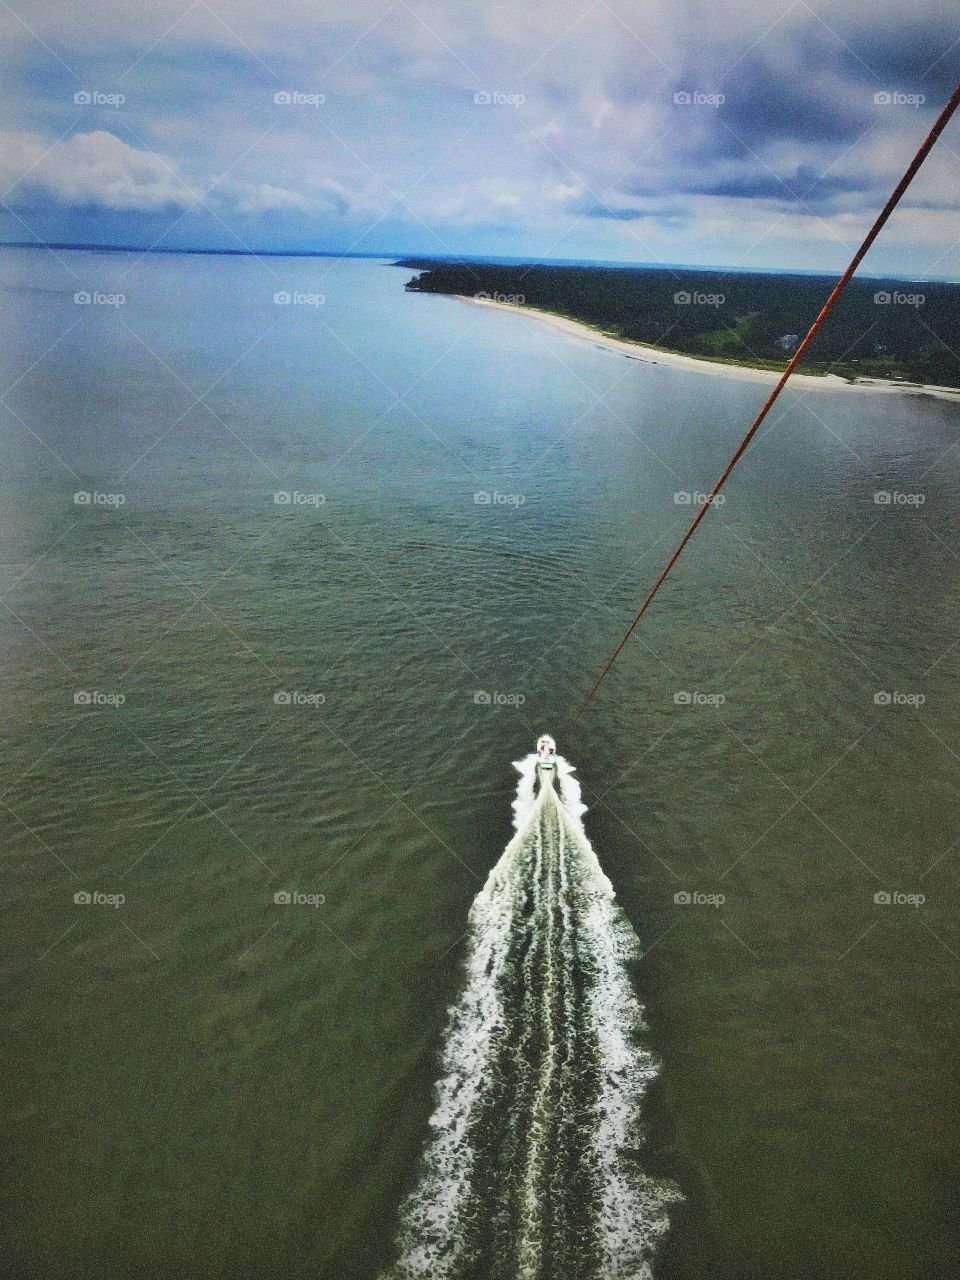 While parasailing over the Atlantic Ocean in the summer. High up on a sunny and beautiful day. 